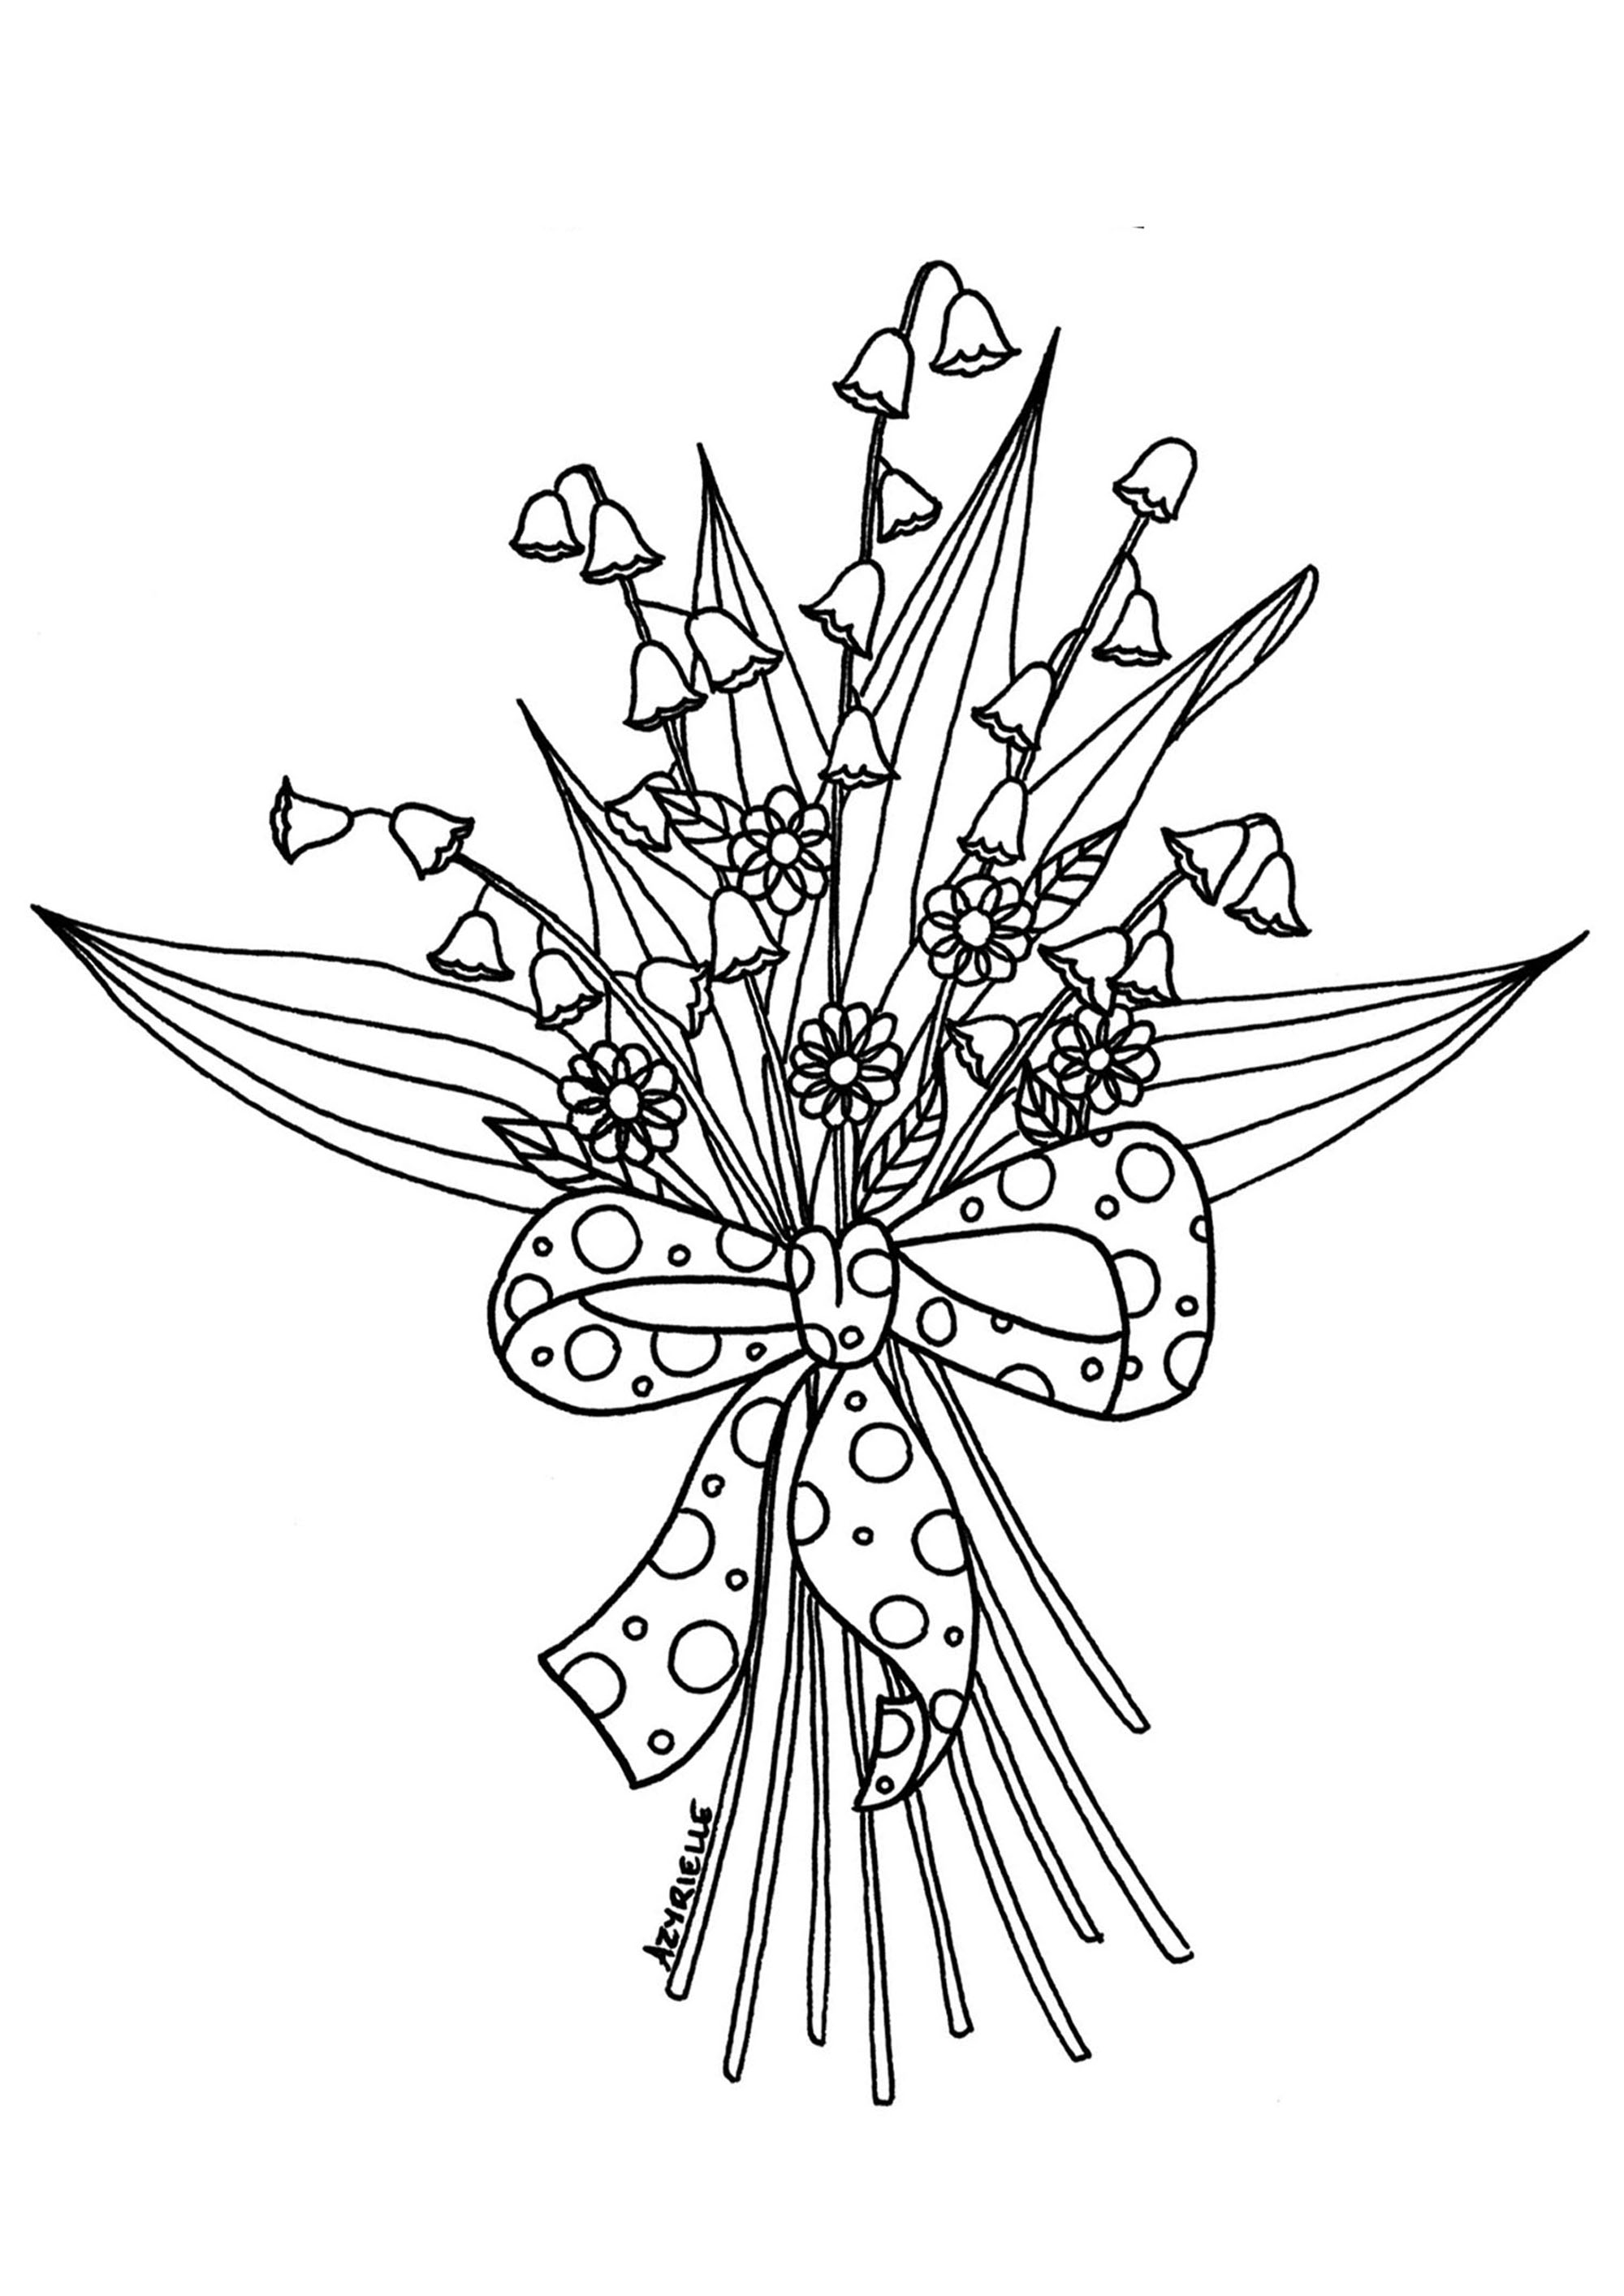 Lily Of The Valley Coloring Page Lilly Of The Valley Flowers Adult Coloring Pages